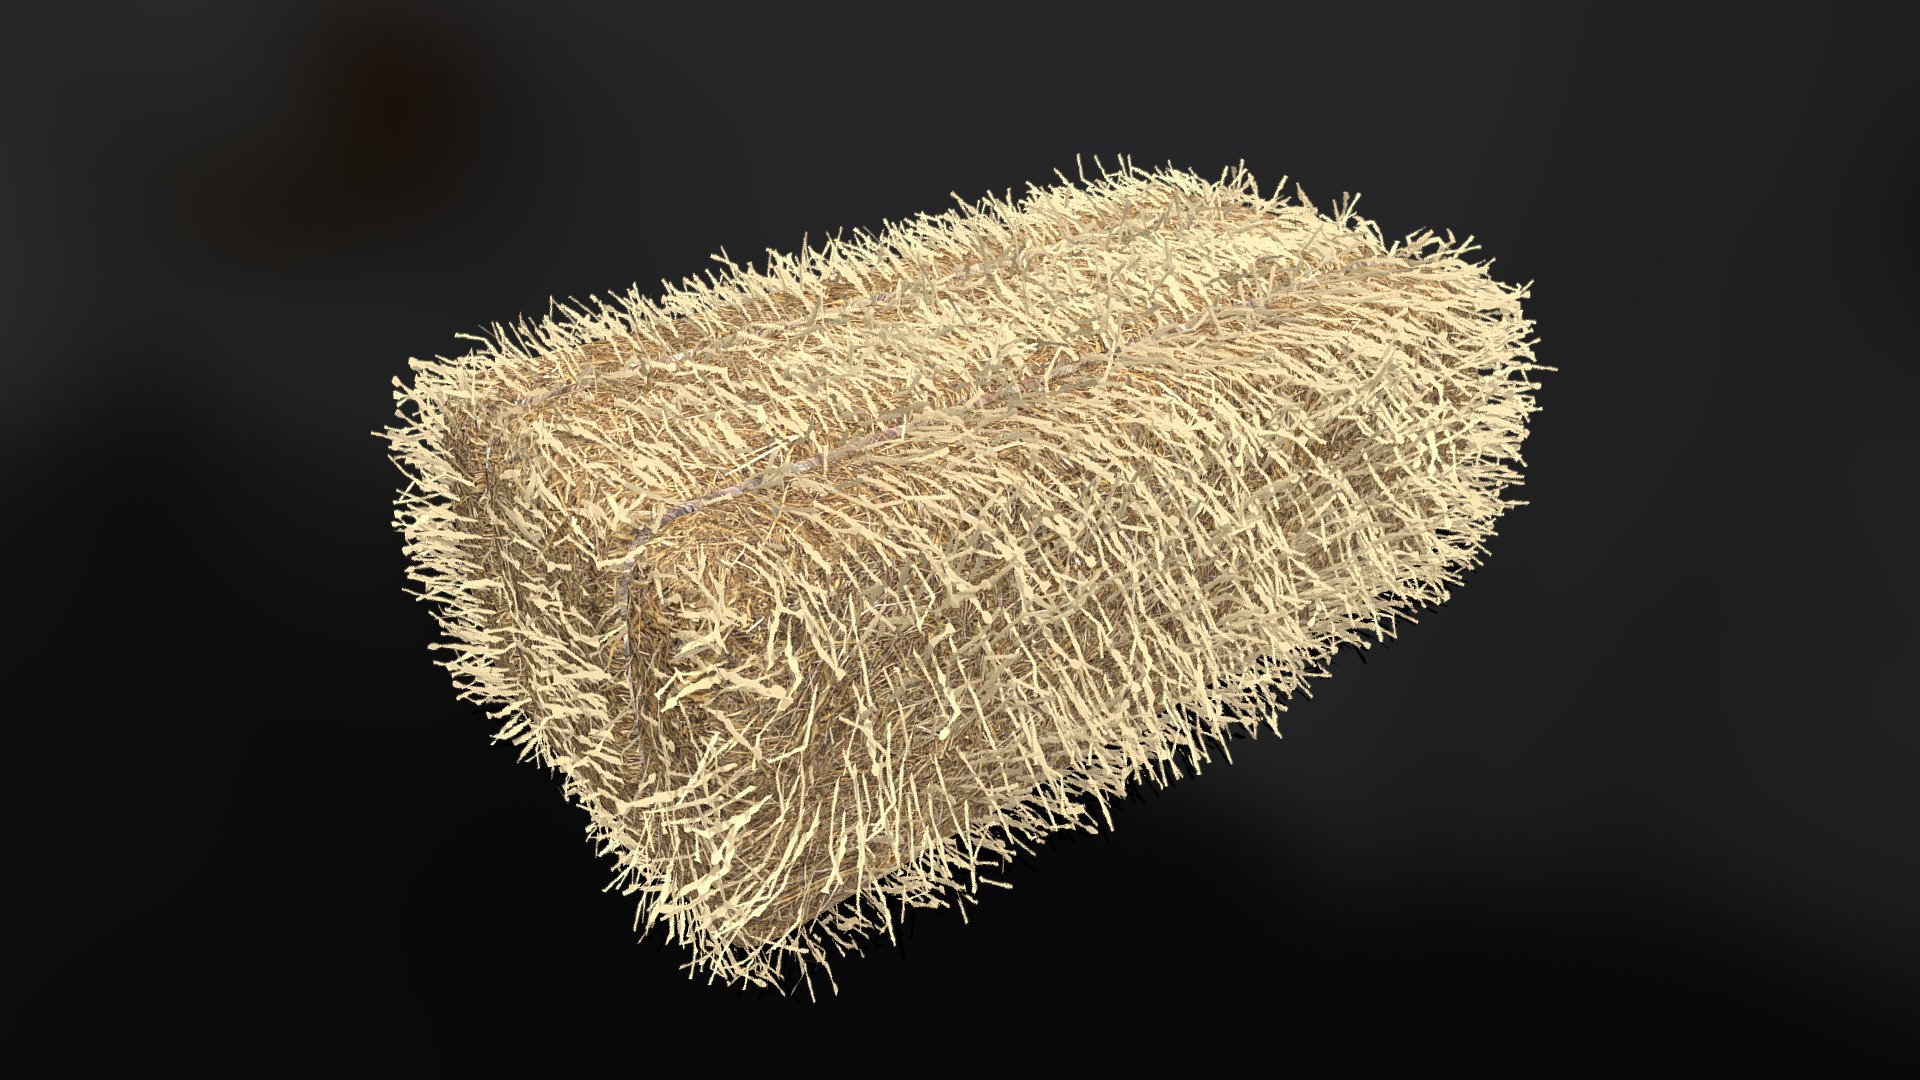 This is a hay bale, intended for use in games or any other real-time environment. 
This model is also included in a larger pack, which contains multiple haystacks and hay bales.

The model is game-ready but relatively high-poly. 
It is intended to be used with performance-enhancing game engine techniques such as auto LODs, distance culling, etc.

4k .tga textures are included in the download:




BaseColor.tga

Normal.tga

ORM.tga (This is a packed texture, where the RGB channels each contain different texture maps)
Red Channel = Ambient Occlusion - Green Channel = Roughness - Blue Channel = Metallic

Model + Textures by: David Falke

Website: https://www.grip420.com/

Discord: Follow us on Discord

Facebook Follow us on Facebook - Haybale Rectangular - 02 - GameReady - Buy Royalty Free 3D model by GRIP420 3d model